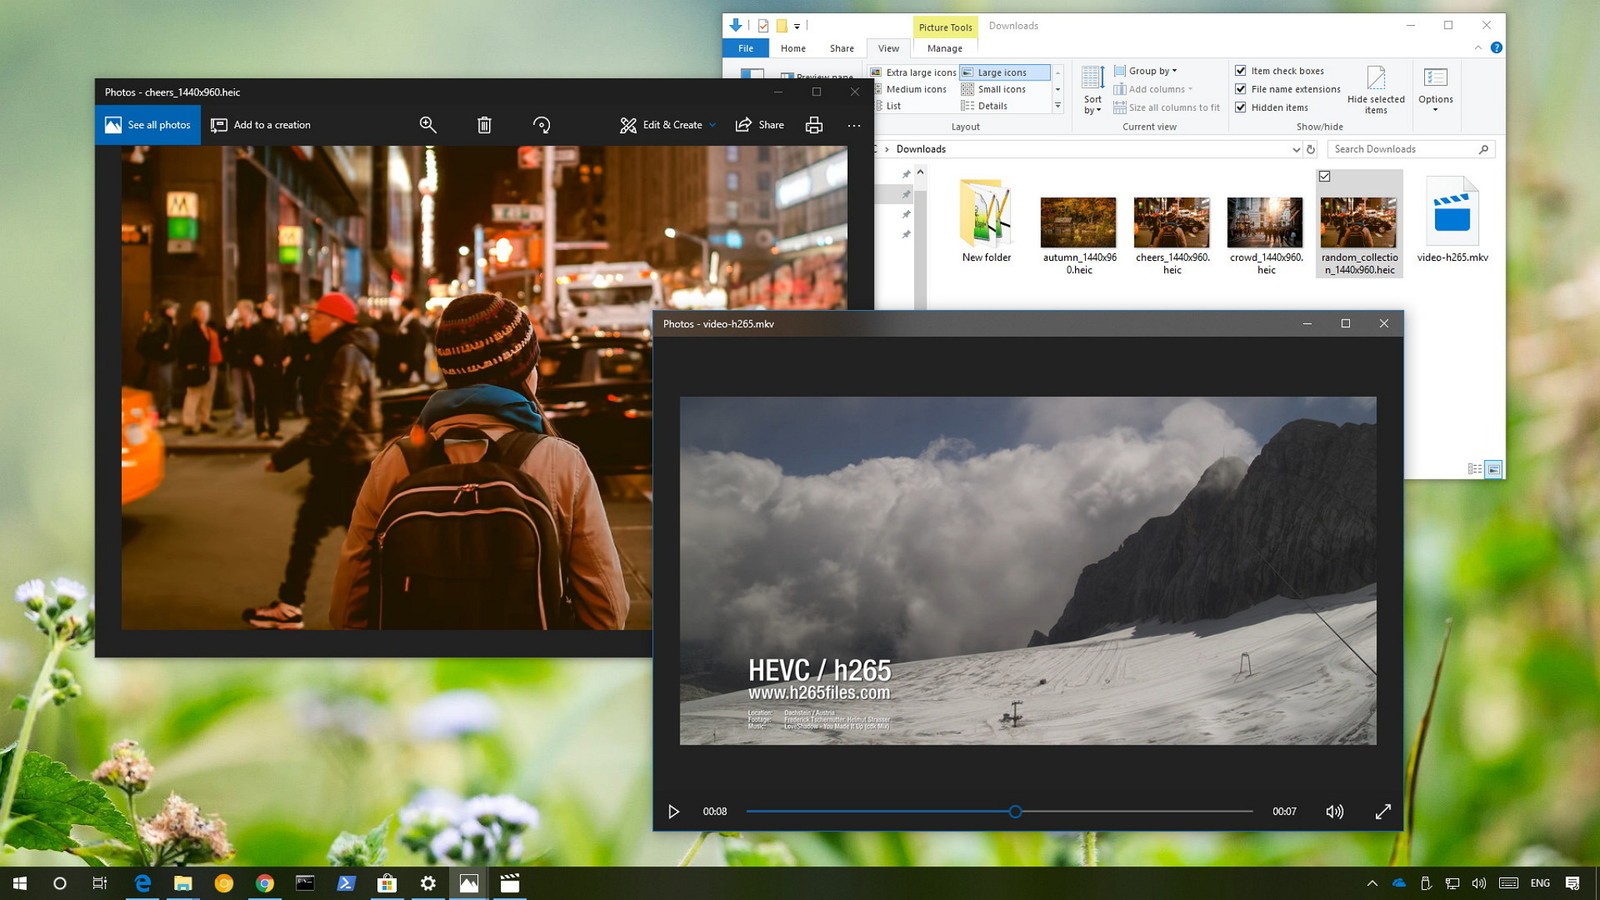 hevc video player for windows 7